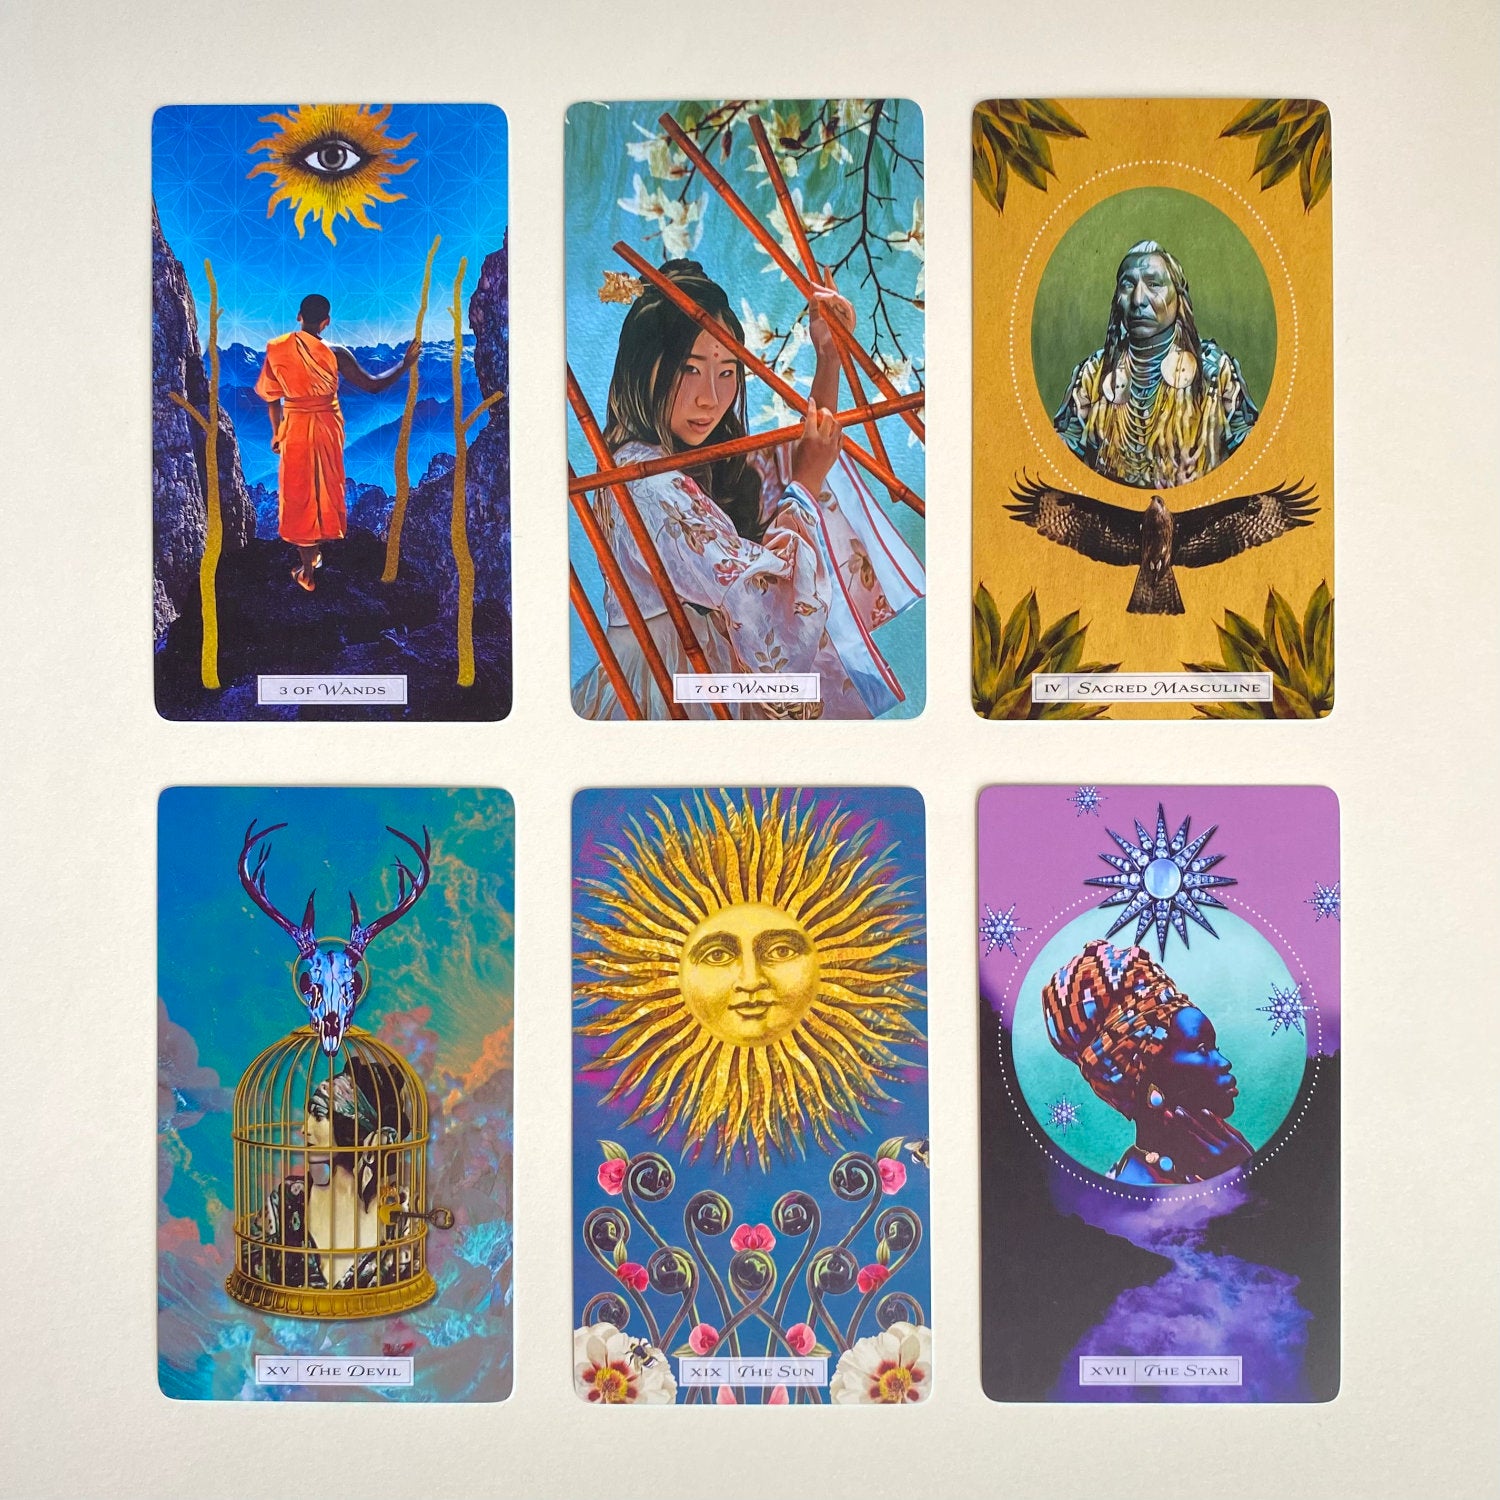 Tarot of the Cosmic Seed by Lalania Simone